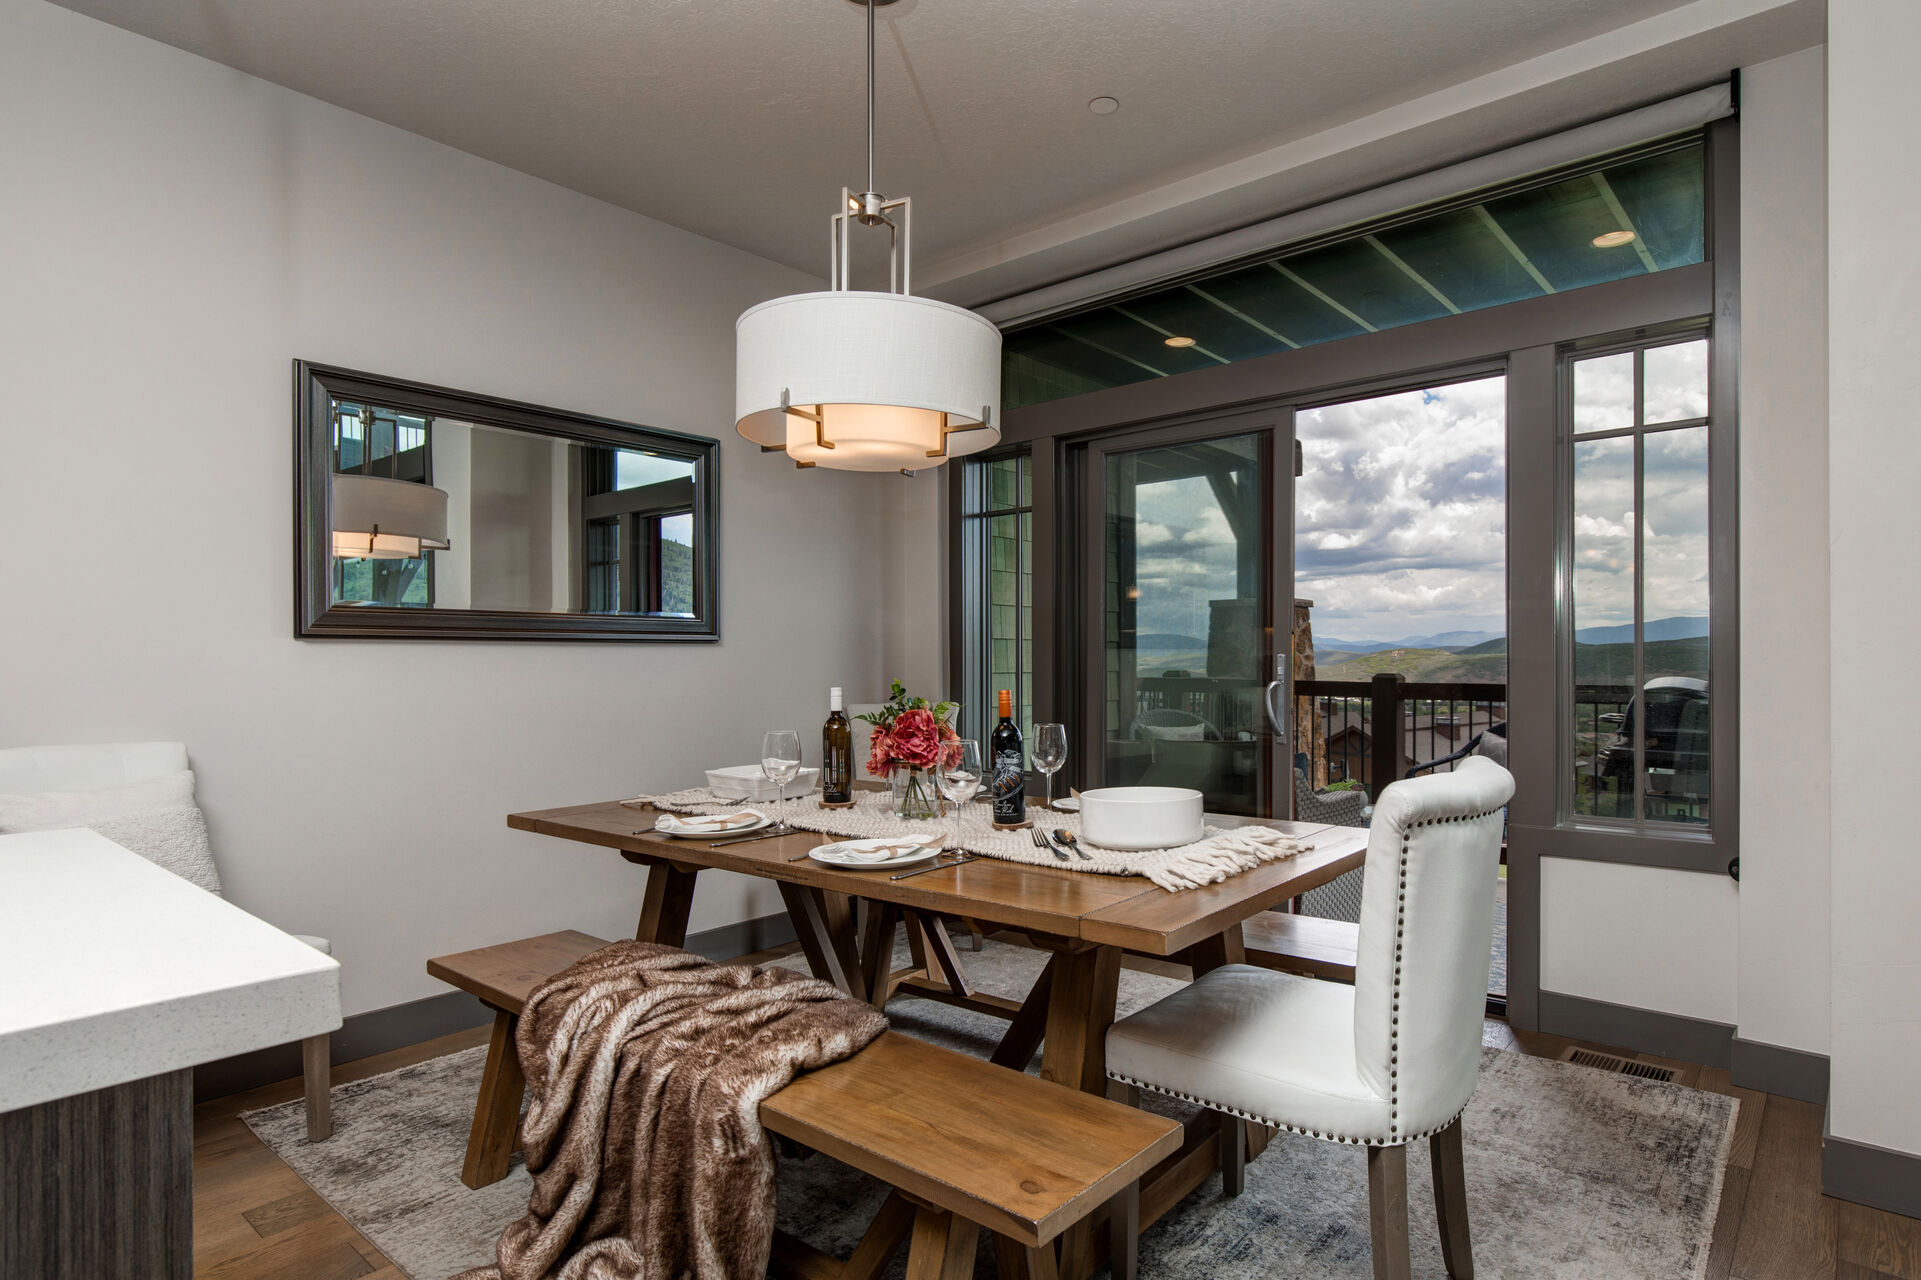 Dining Area with beautiful golf course views and seating for 6